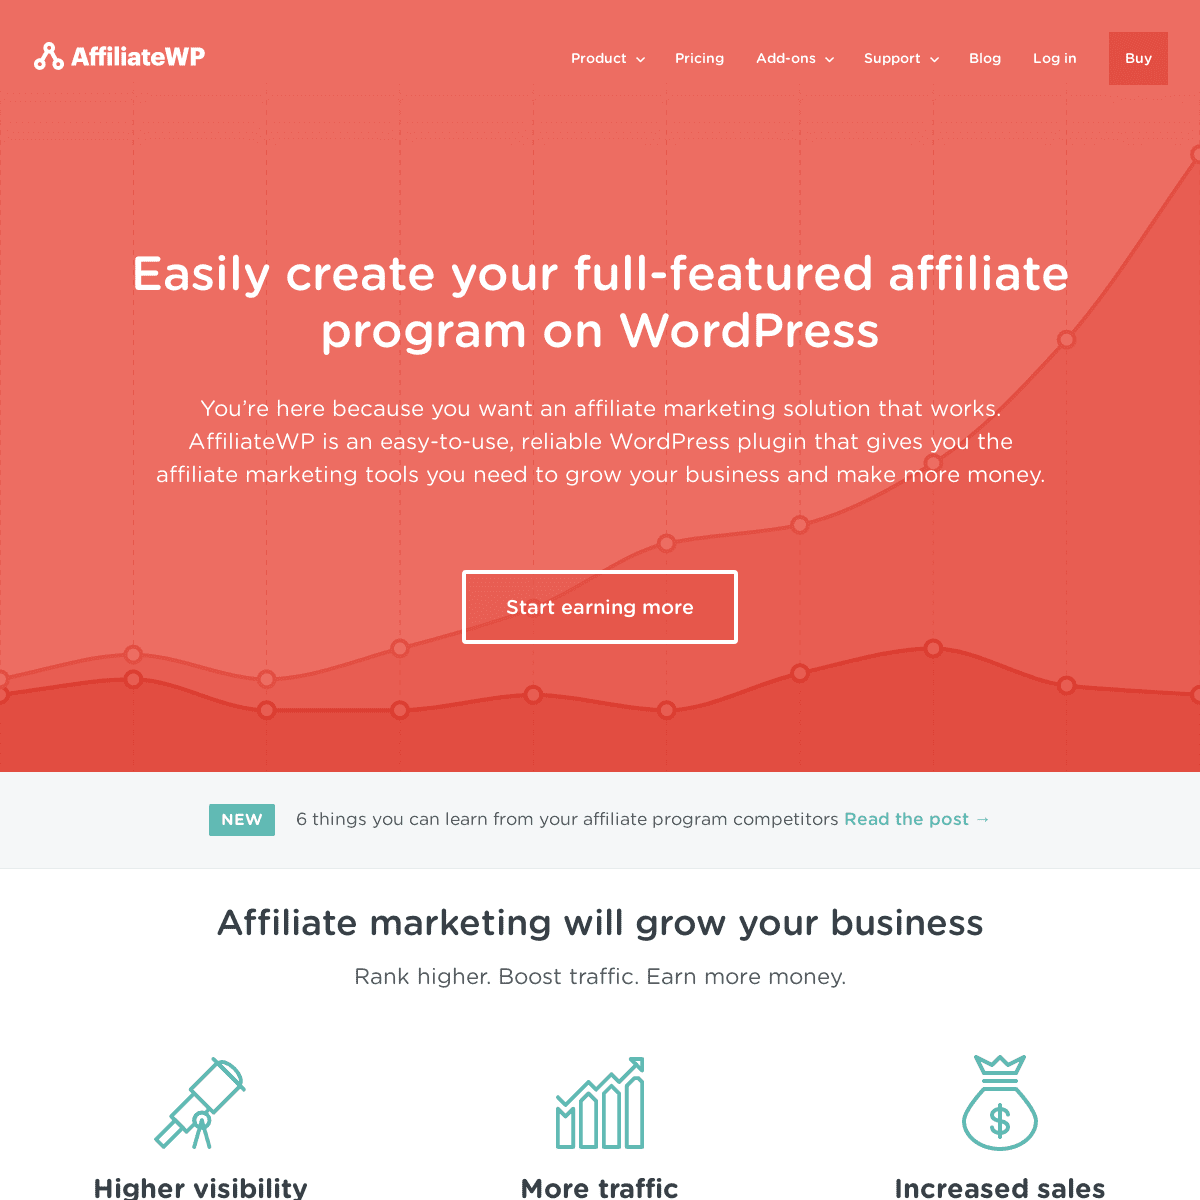 A complete backup of affiliatewp.com